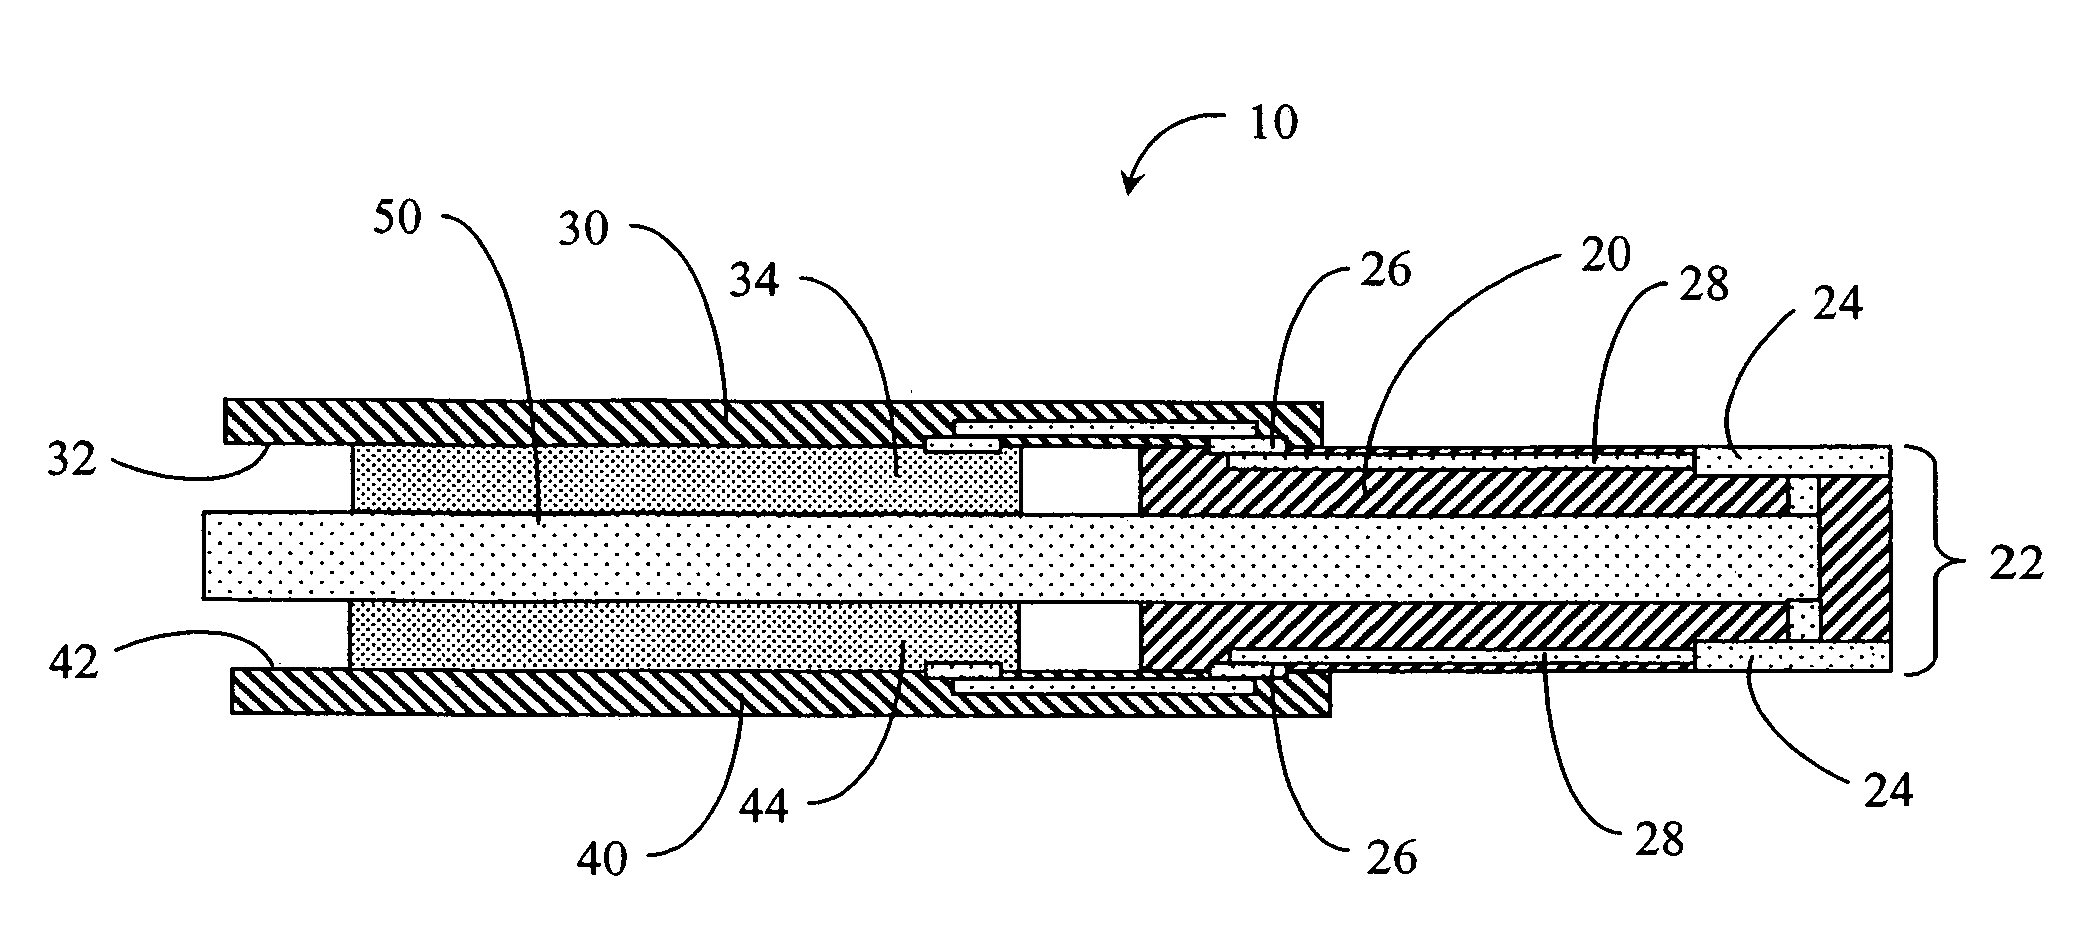 High density memory module using stacked printed circuit boards